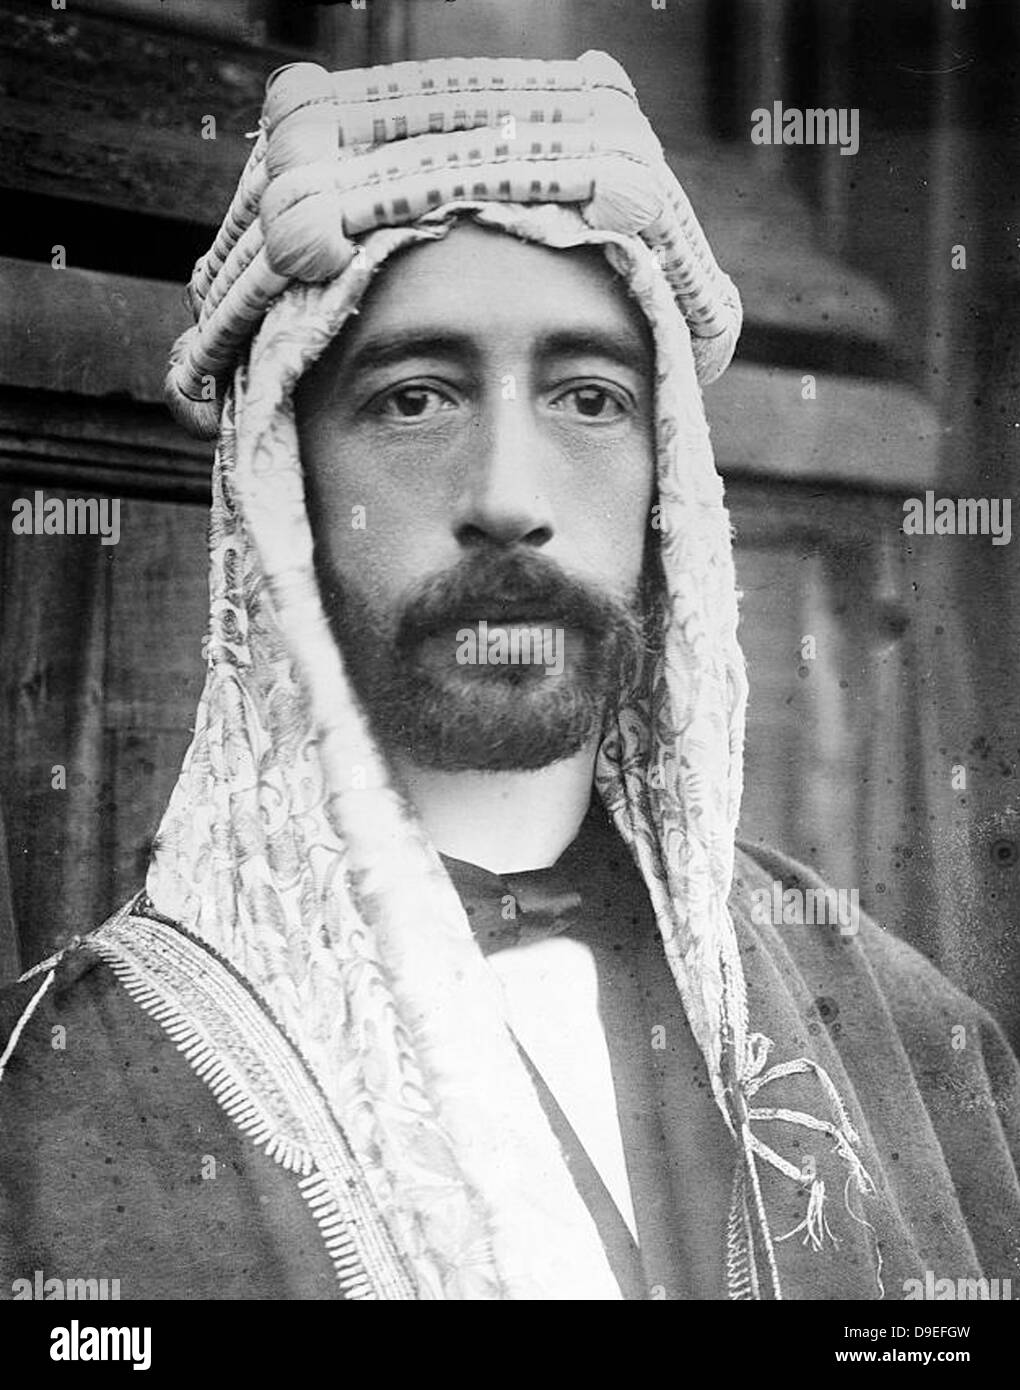 FAISAL 1 OF IRAQ (1885-1933) of the Hashmite dynasty Stock Photo